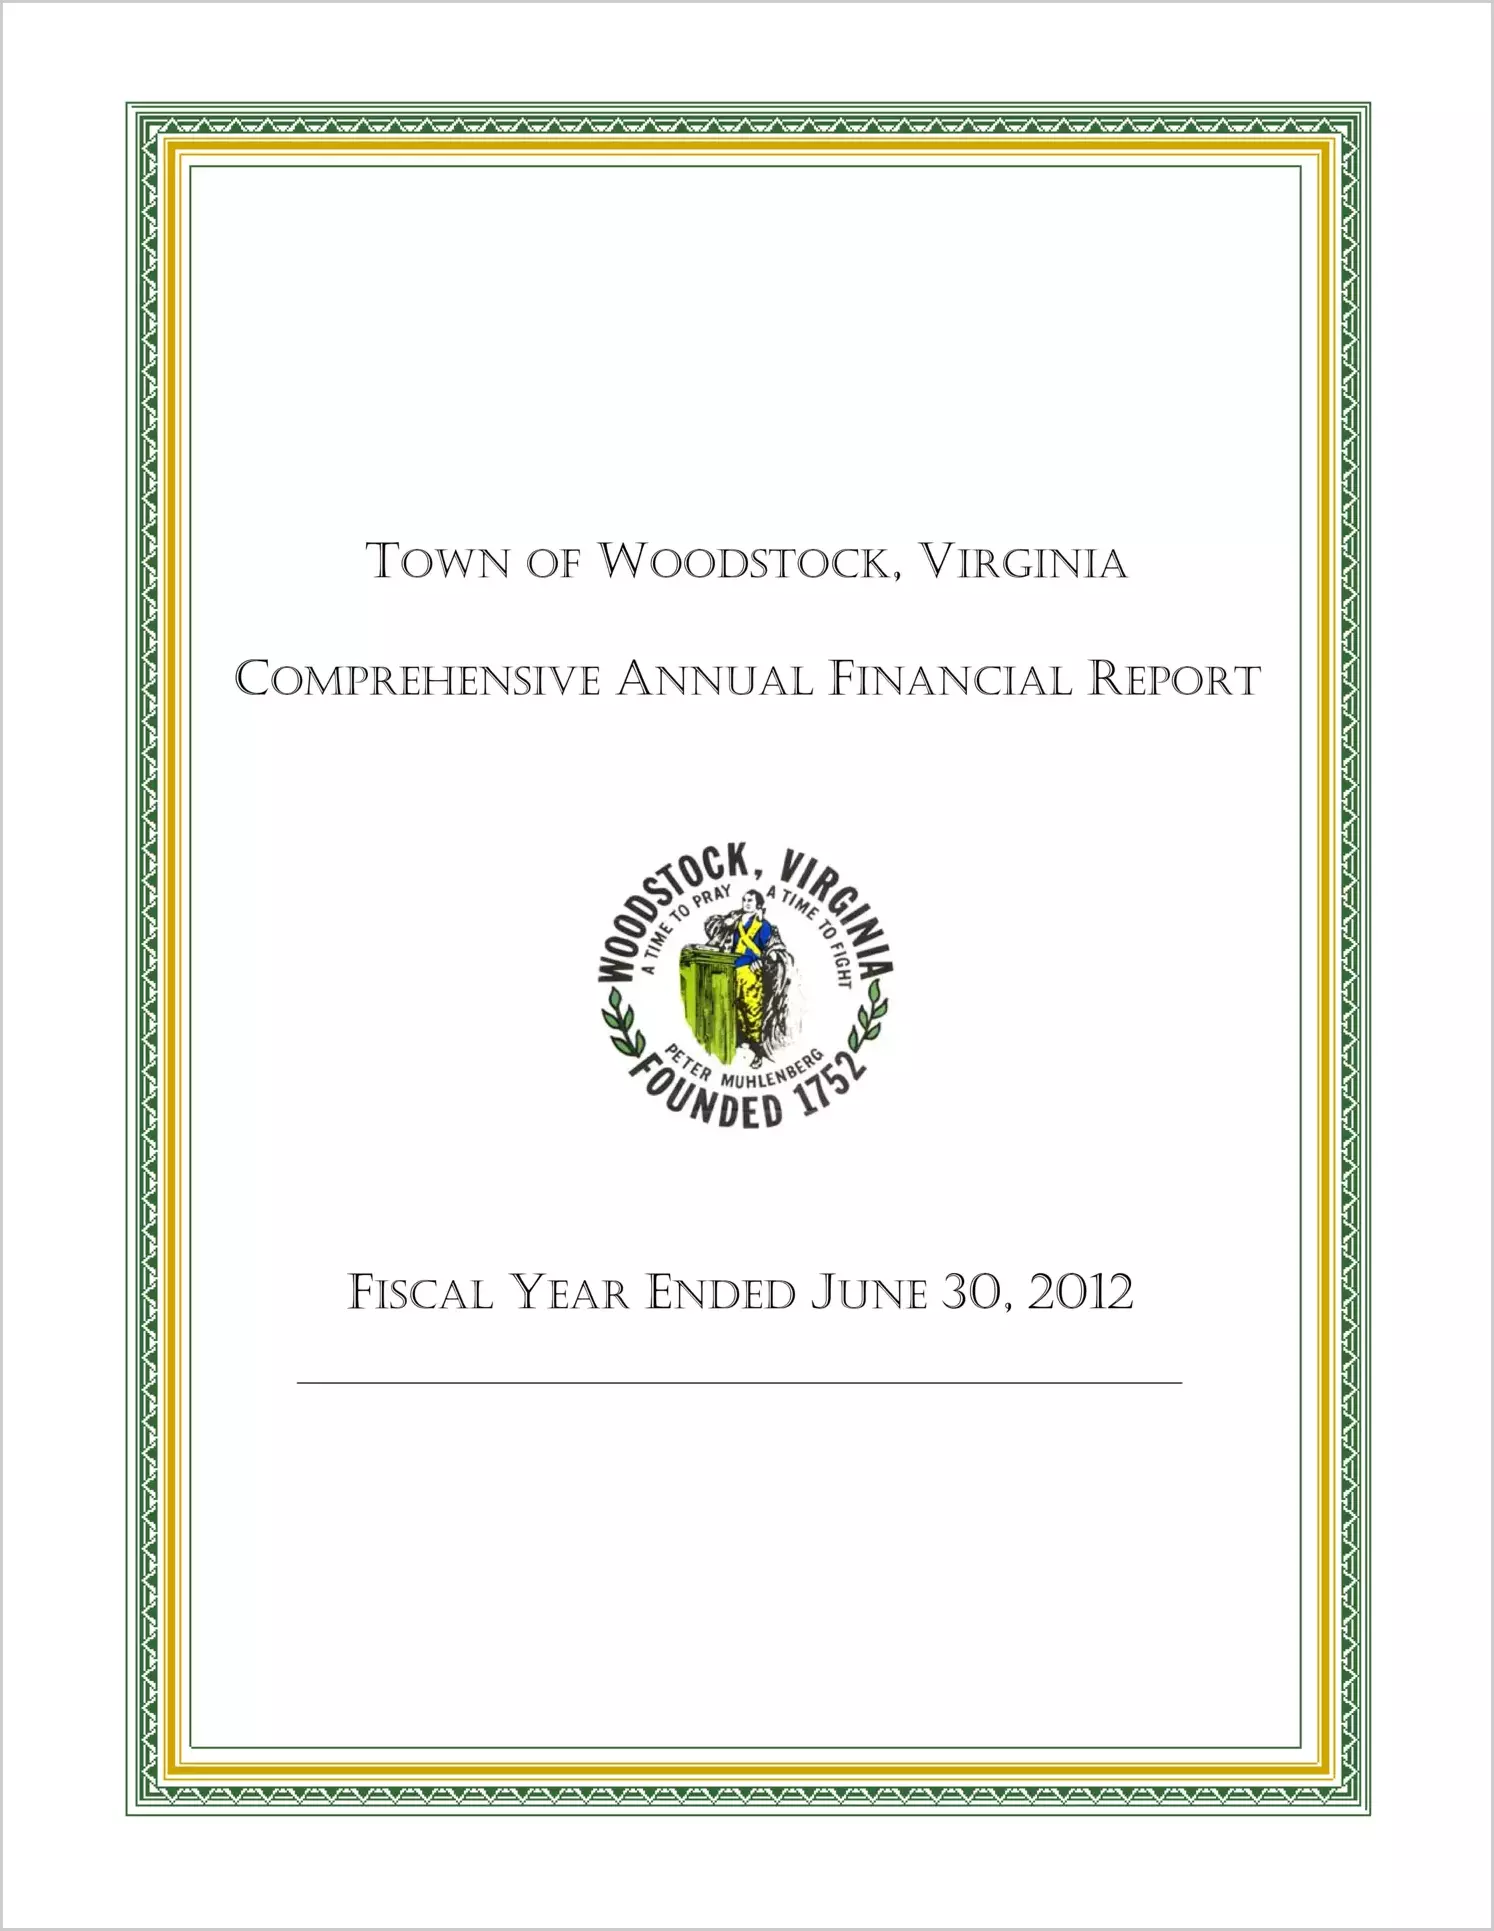 2012 Annual Financial Report for Town of Woodstock